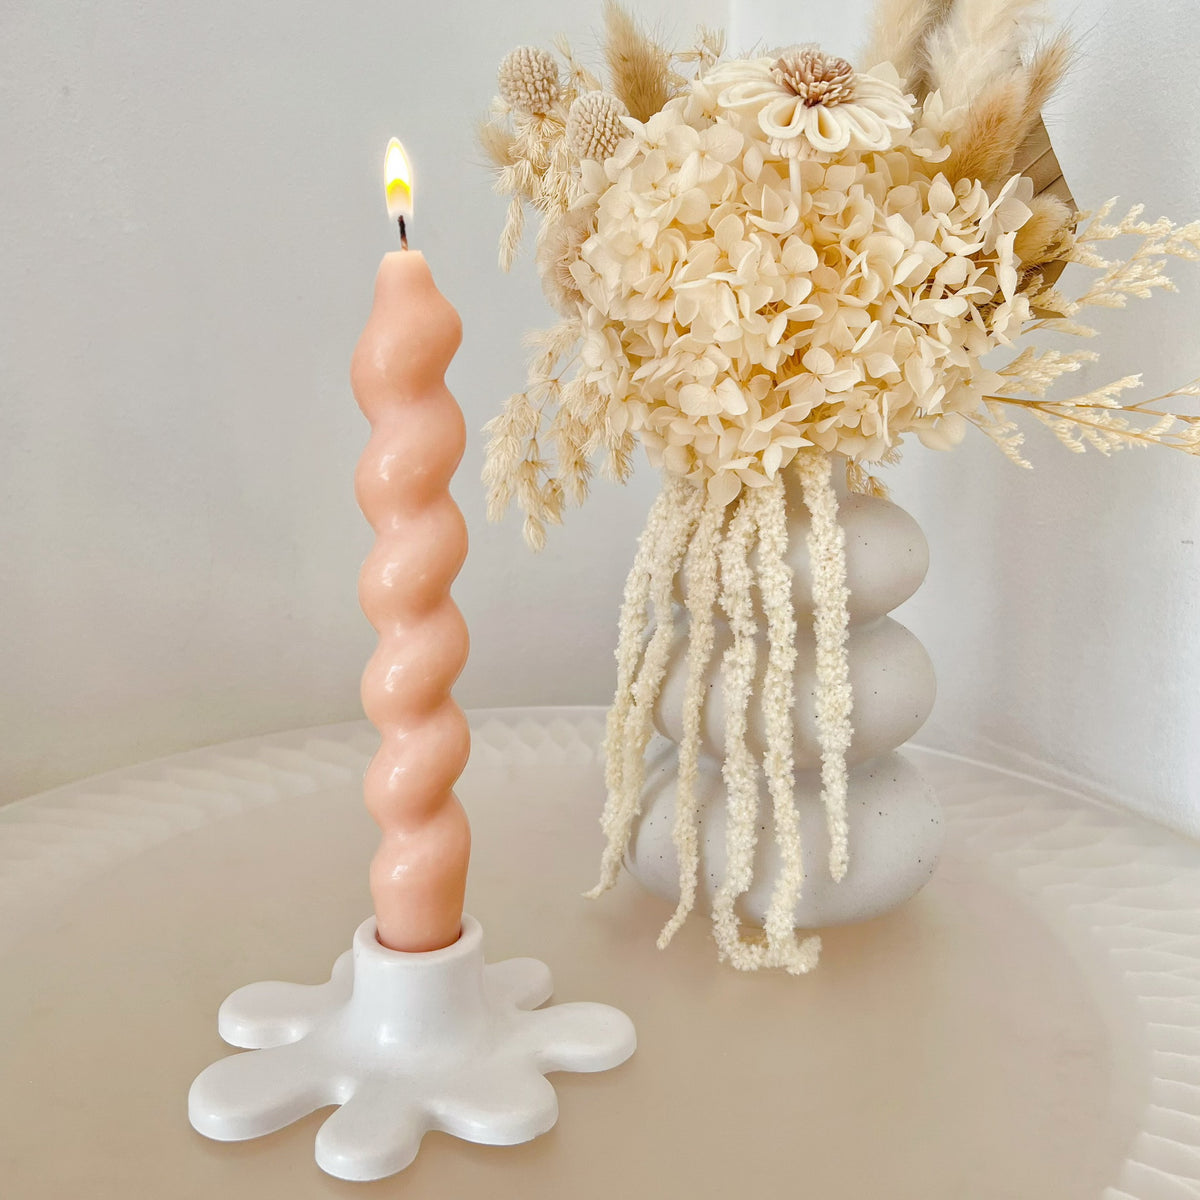 Twisted Dripless Taper Candle, Unscented Diner Candle, Paraffin-free Candlesticks, LMJ Candles